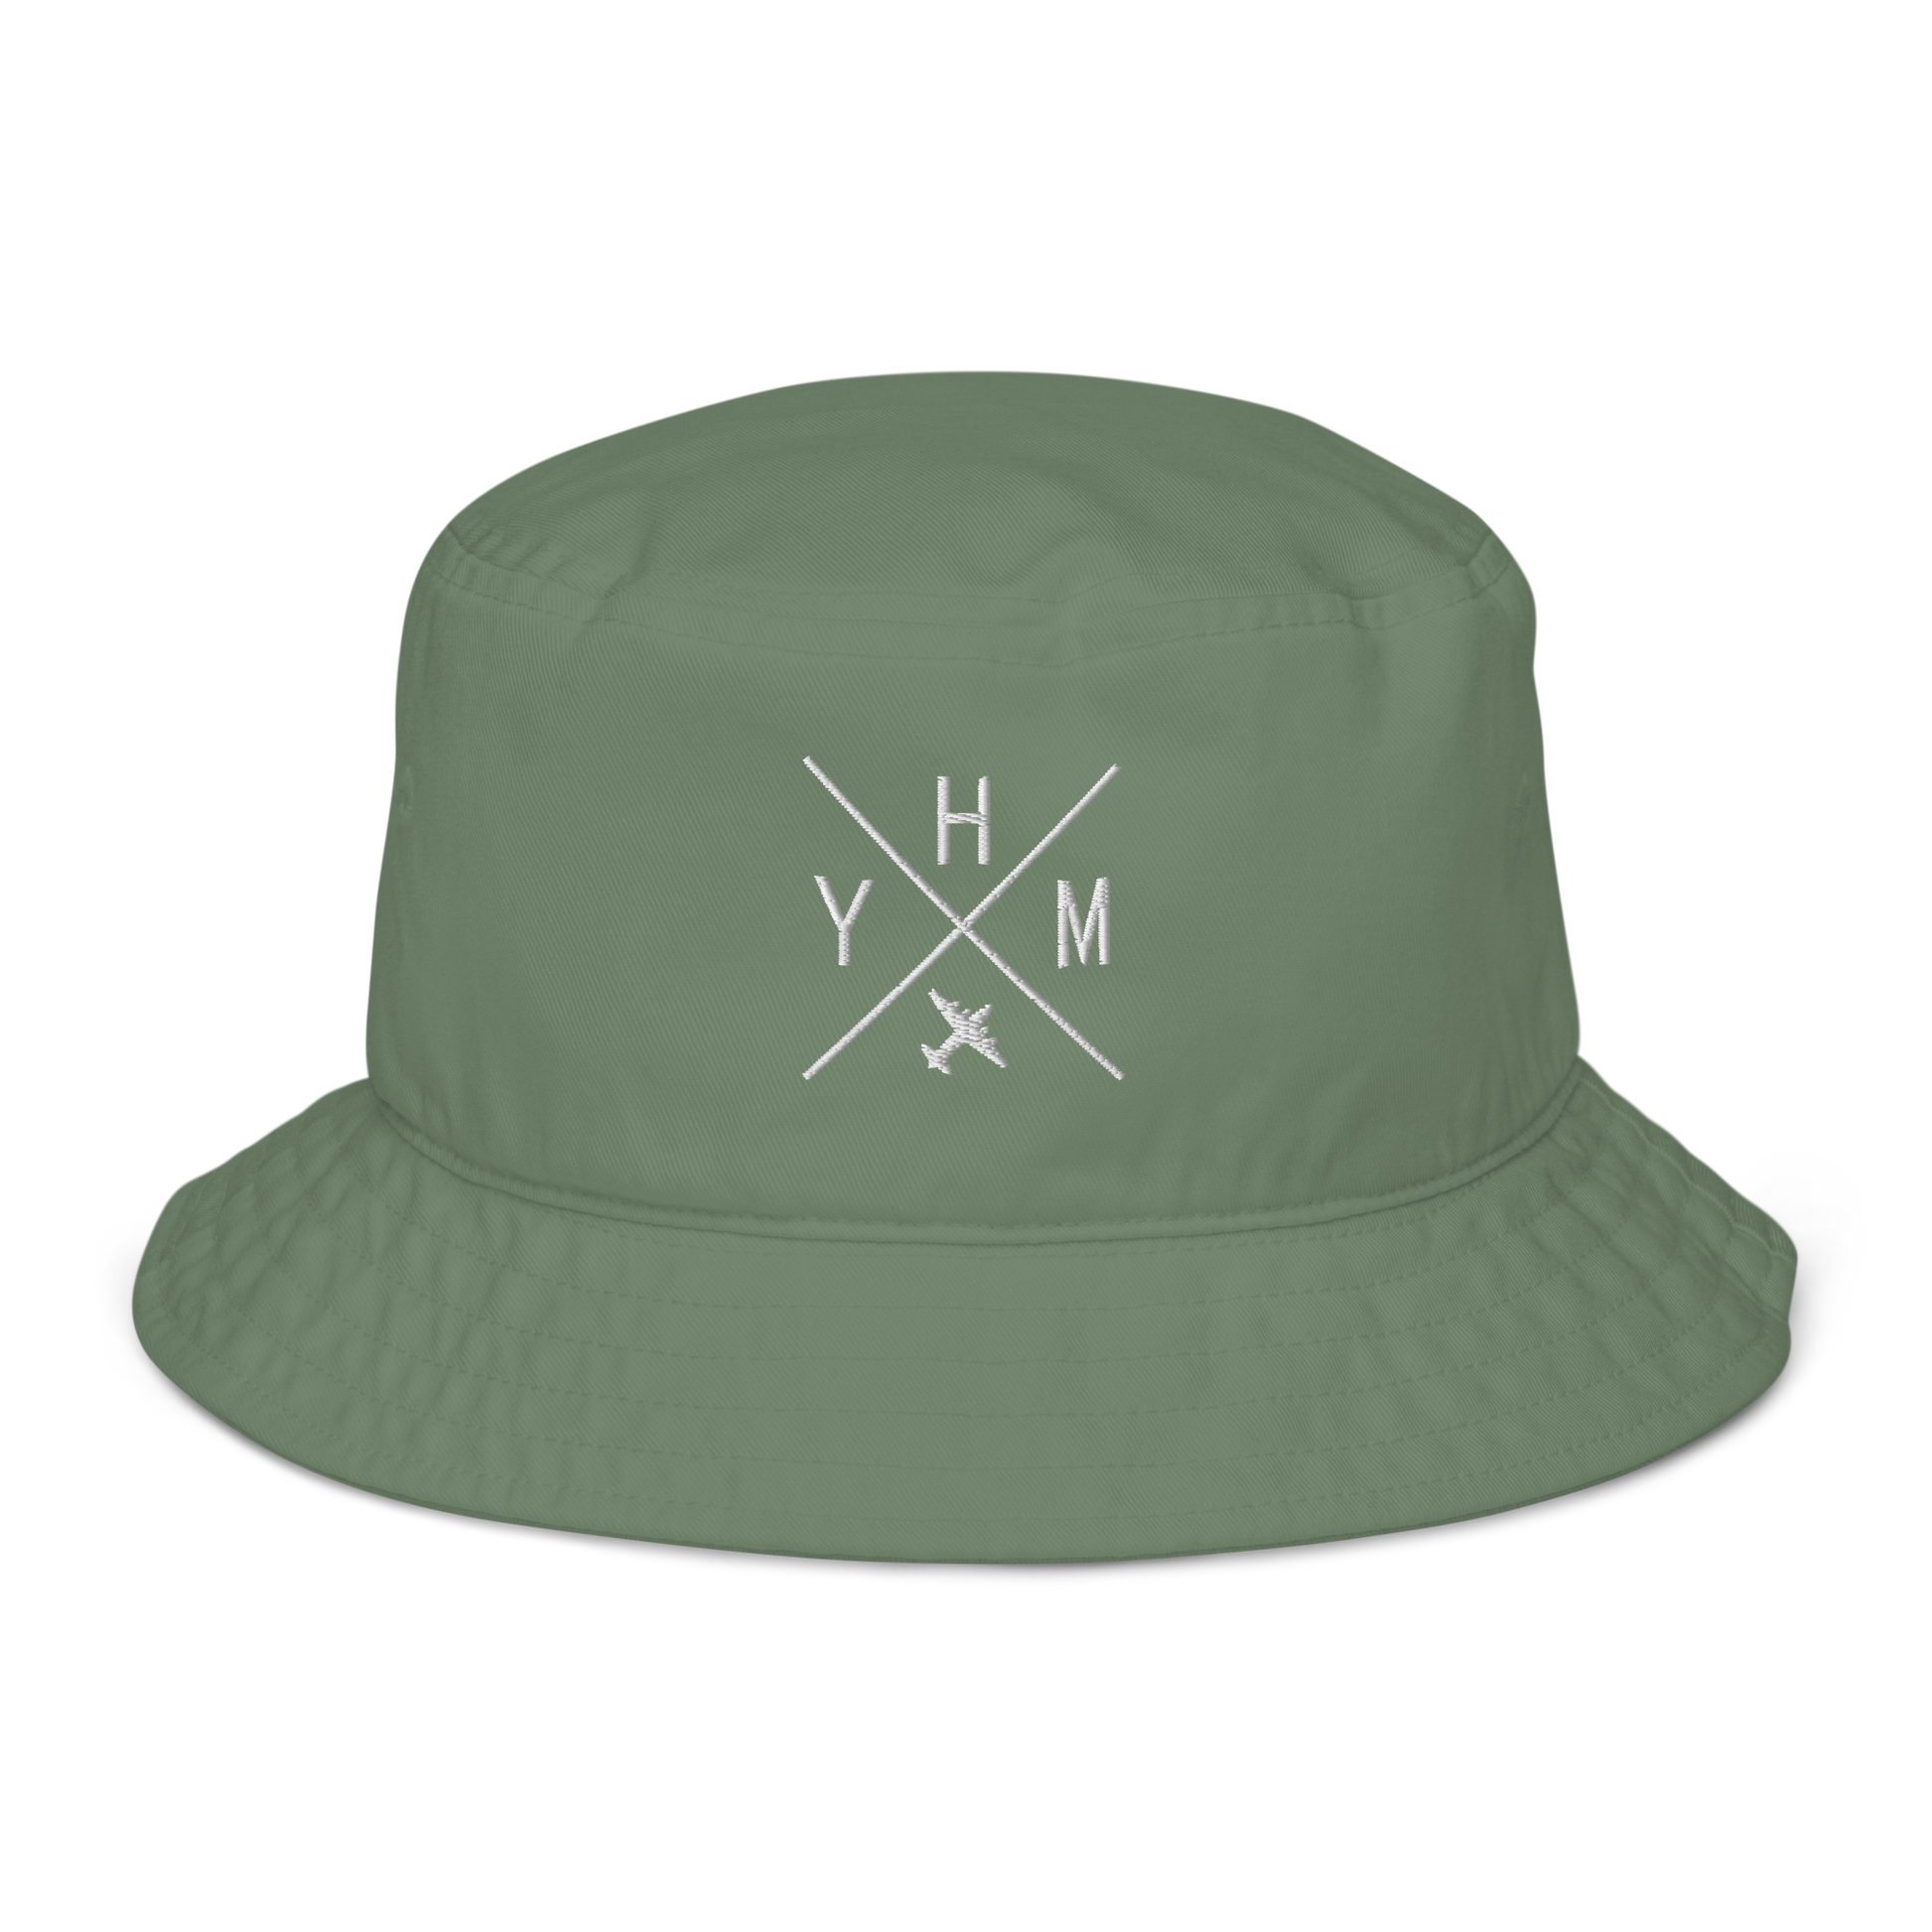 YHM Designs - YHM Hamilton Organic Cotton Bucket Hat - Crossed-X Design with Airport Code and Vintage Propliner - White Embroidery - Image 06